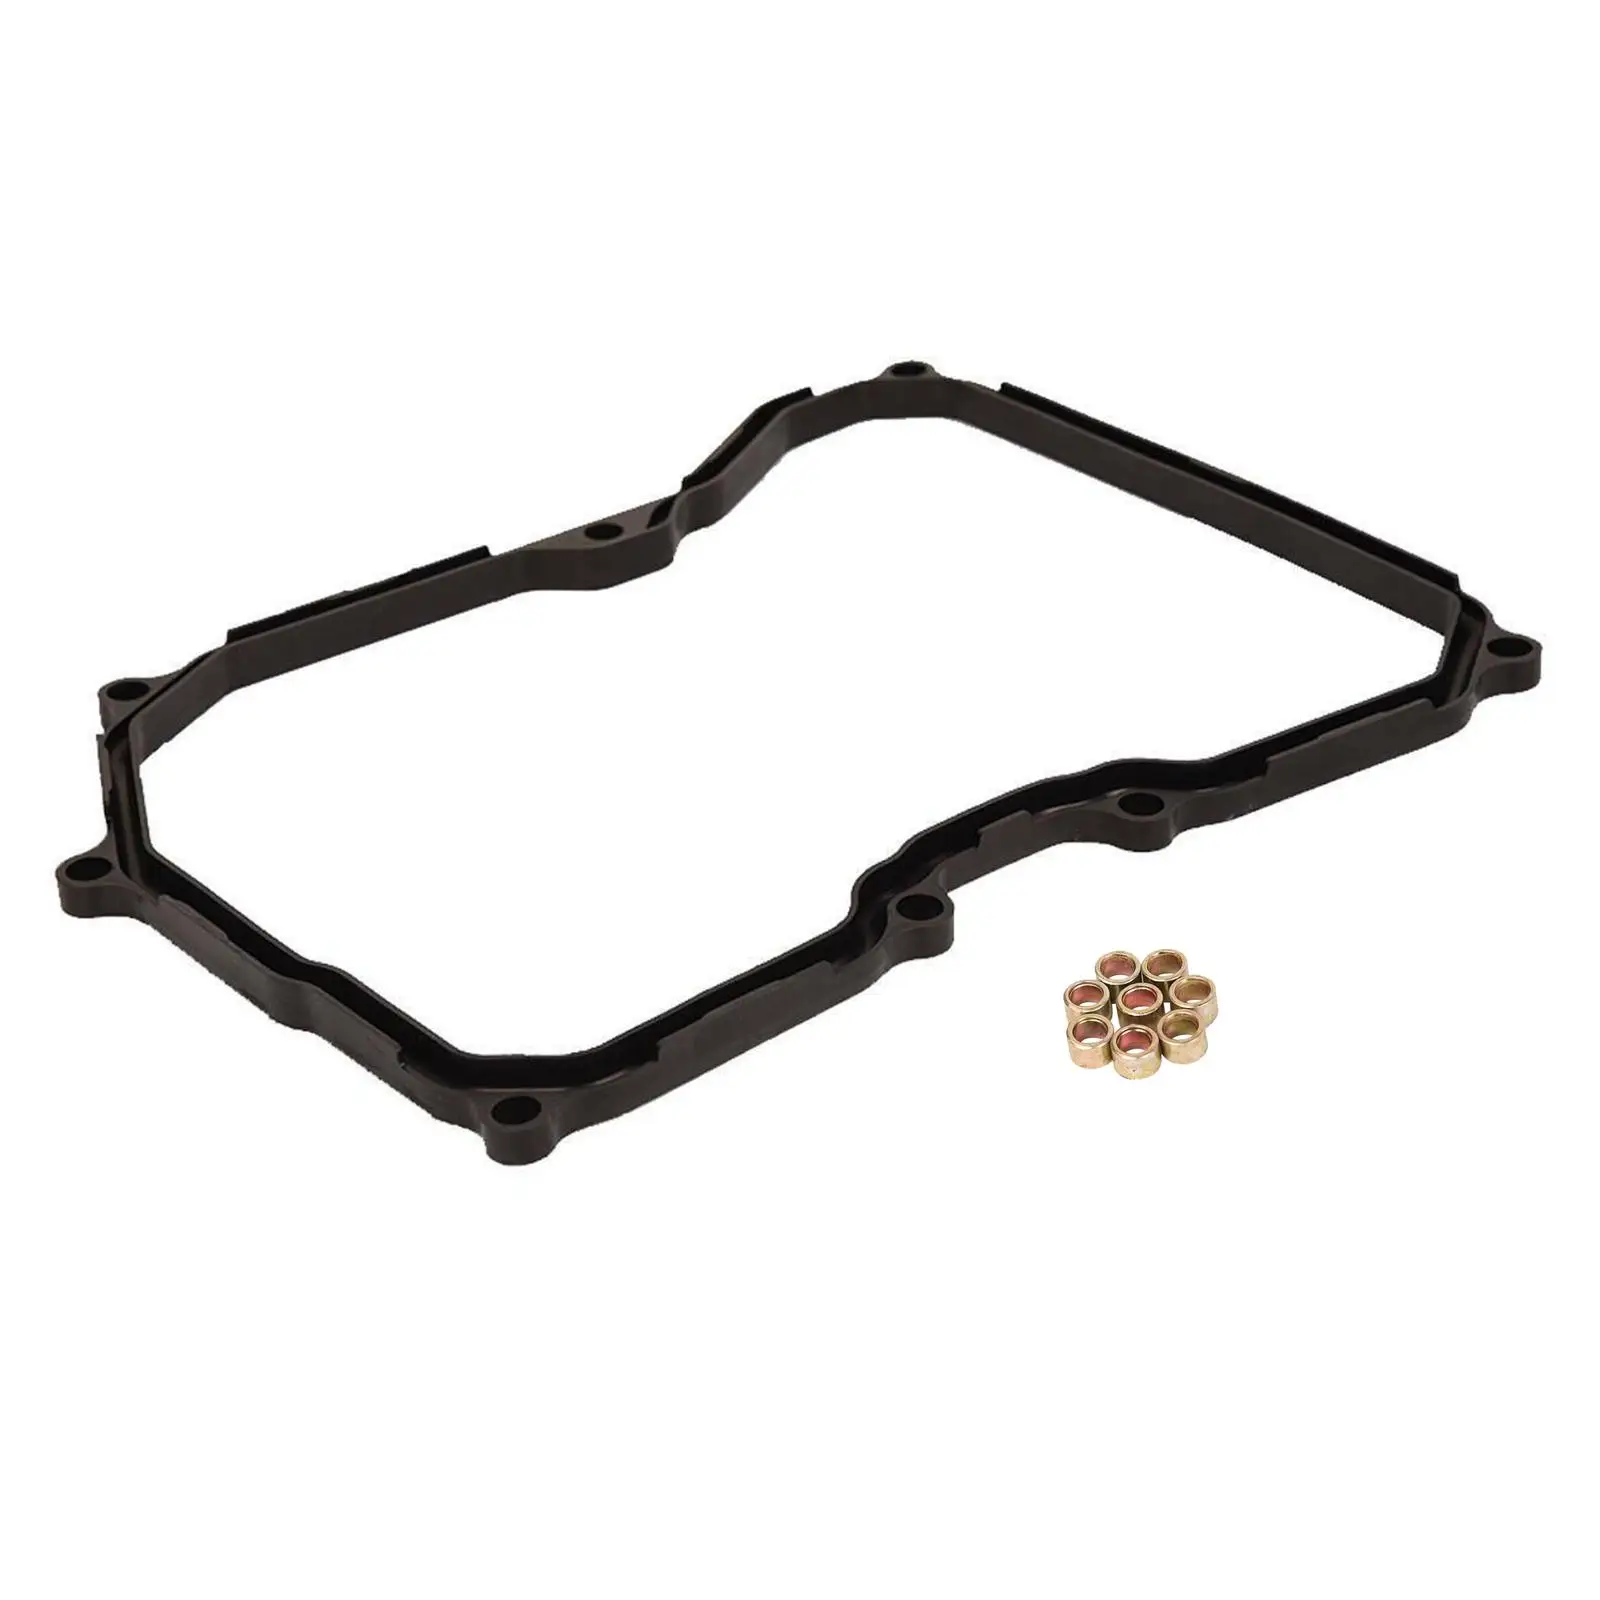 Transmission Pan Gasket Lightweight for Mini 2007+ Replace Accessories